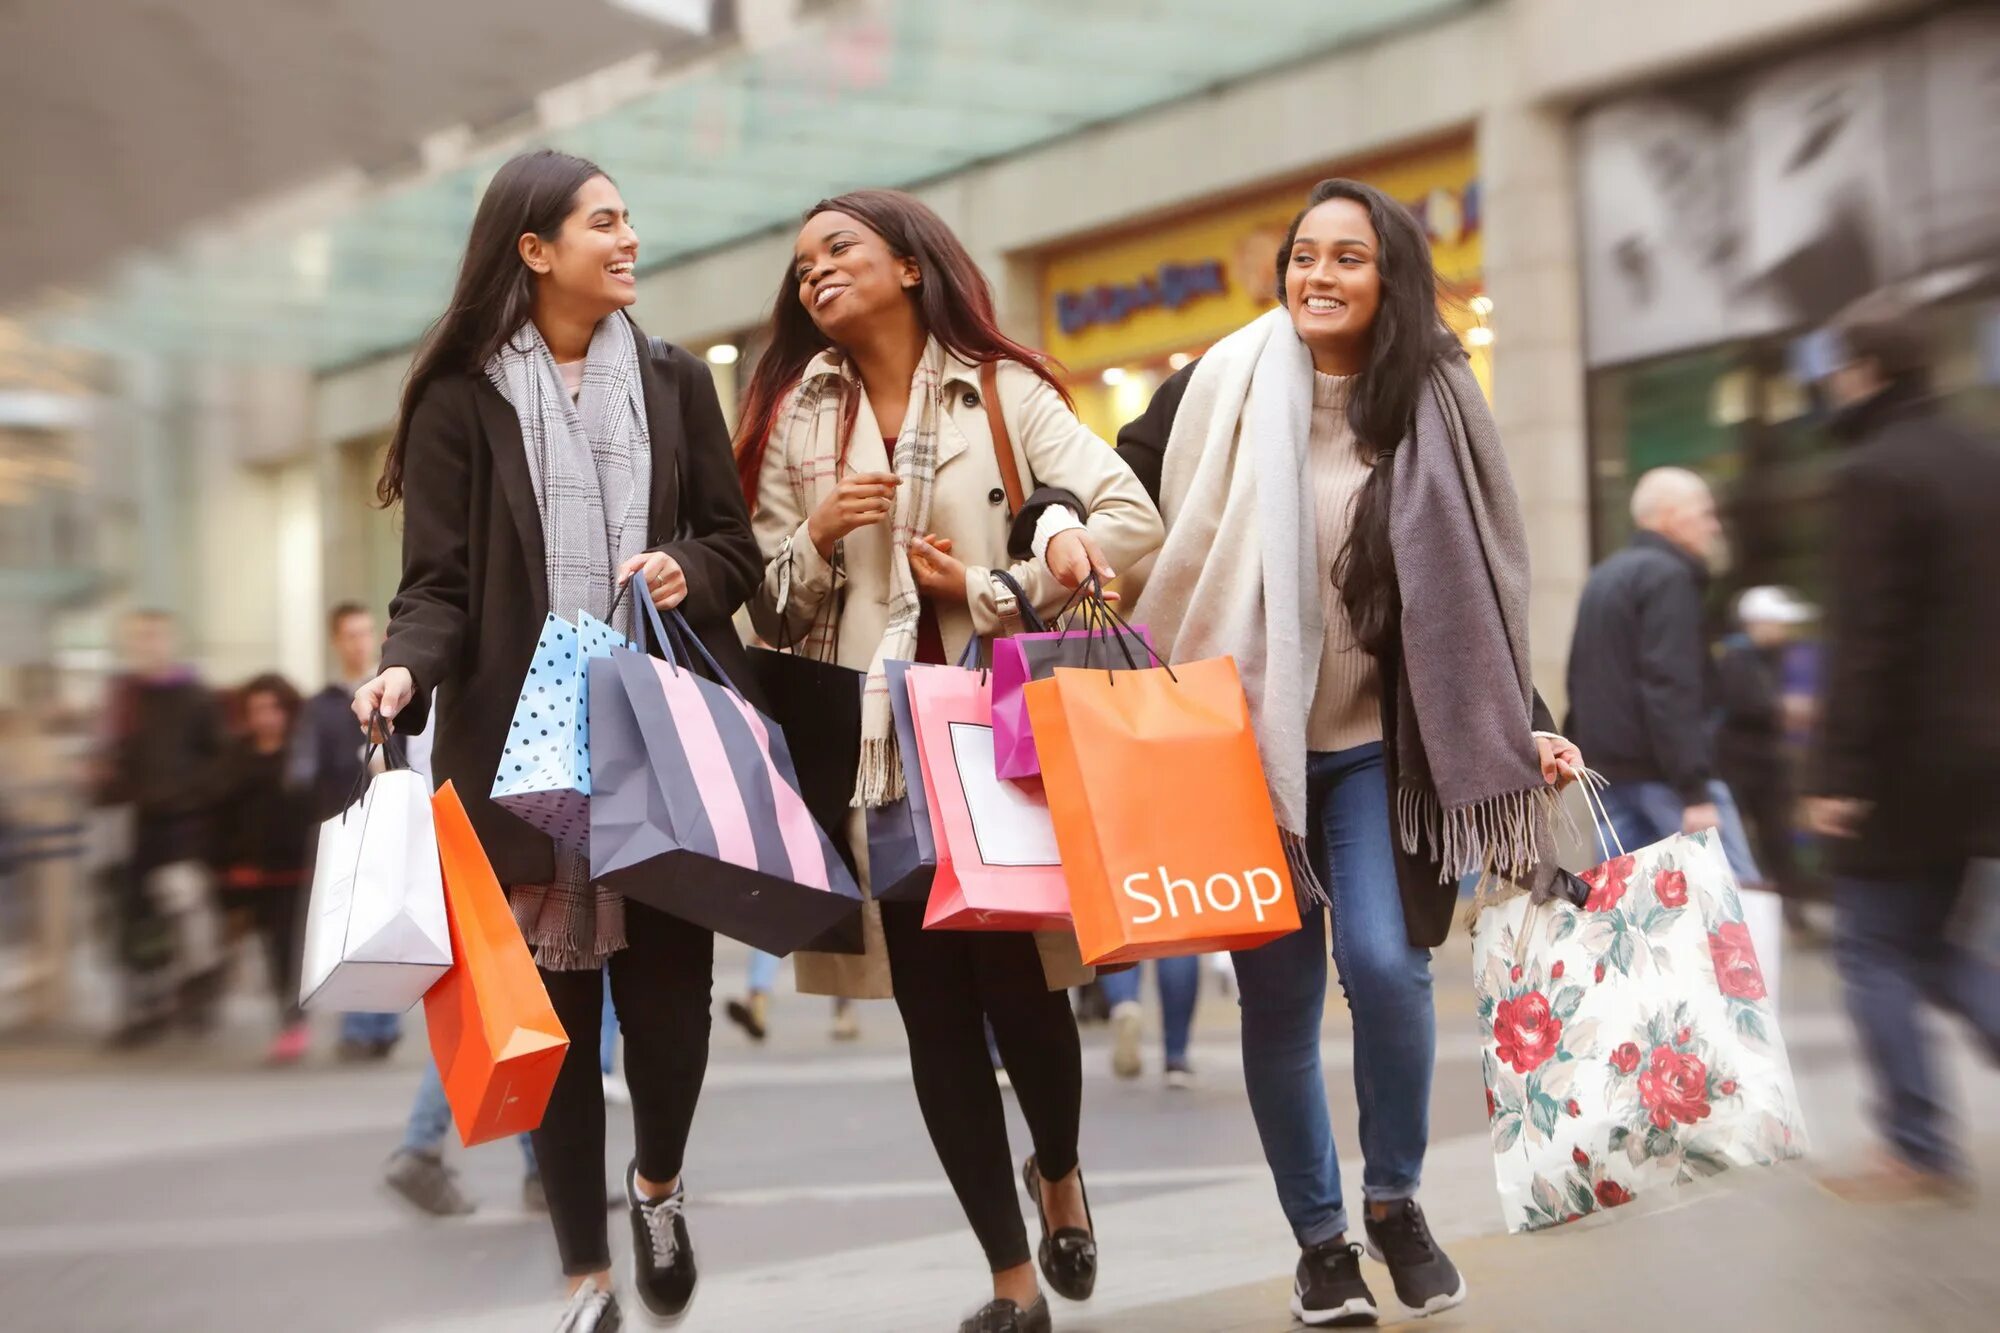 1- She’ll go shopping in Town …. Consumer confidence. We usually go shopping